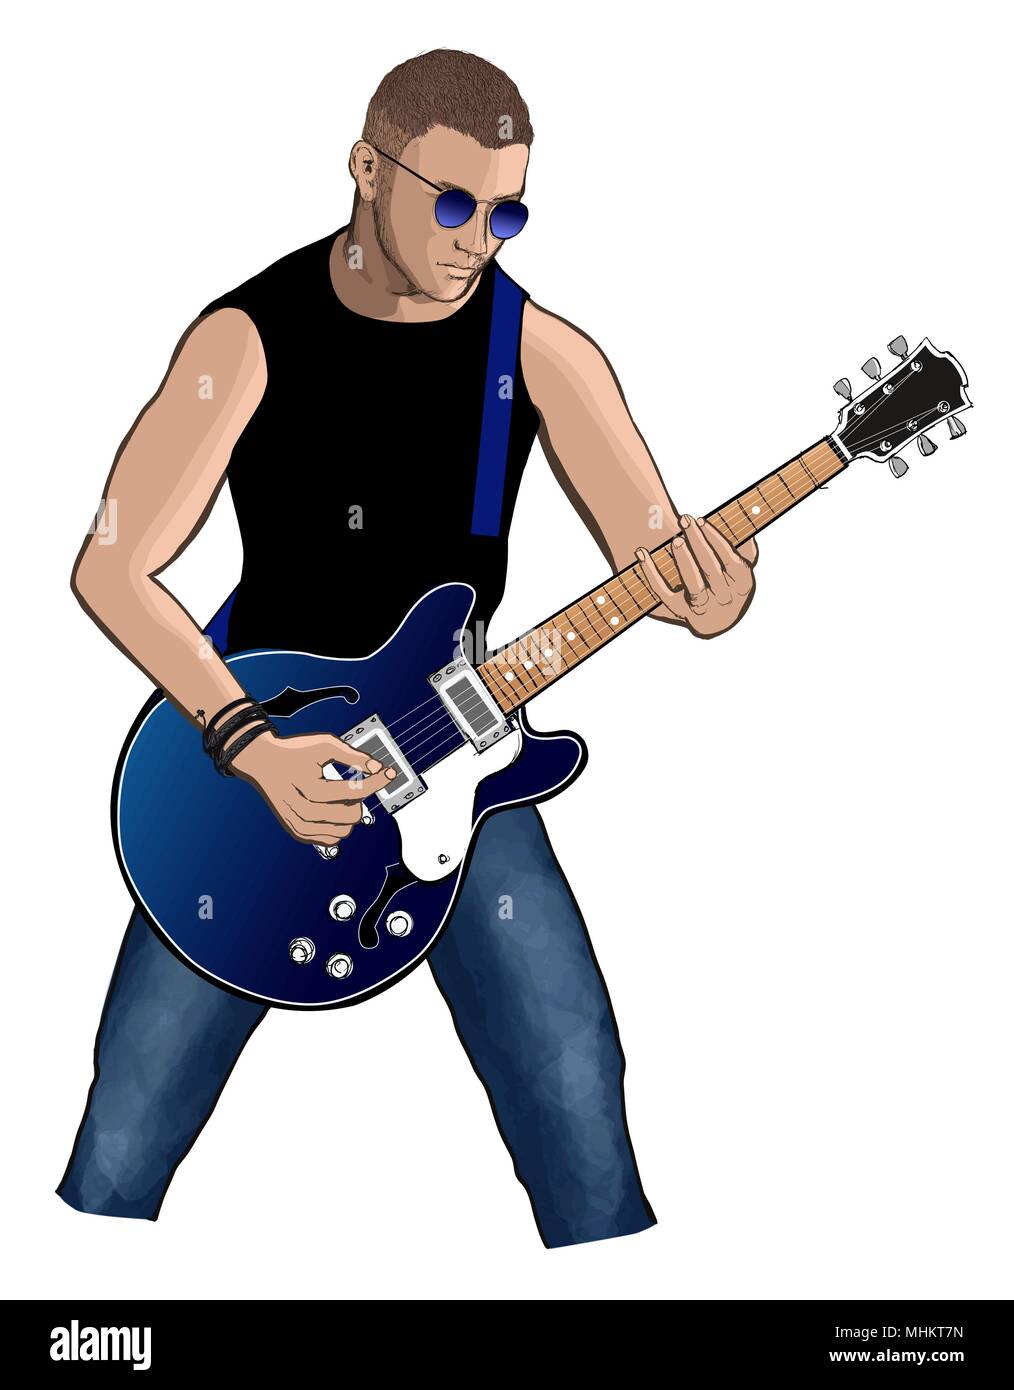 Guitar player with blue electric guitar - vector illustration Stock Vector